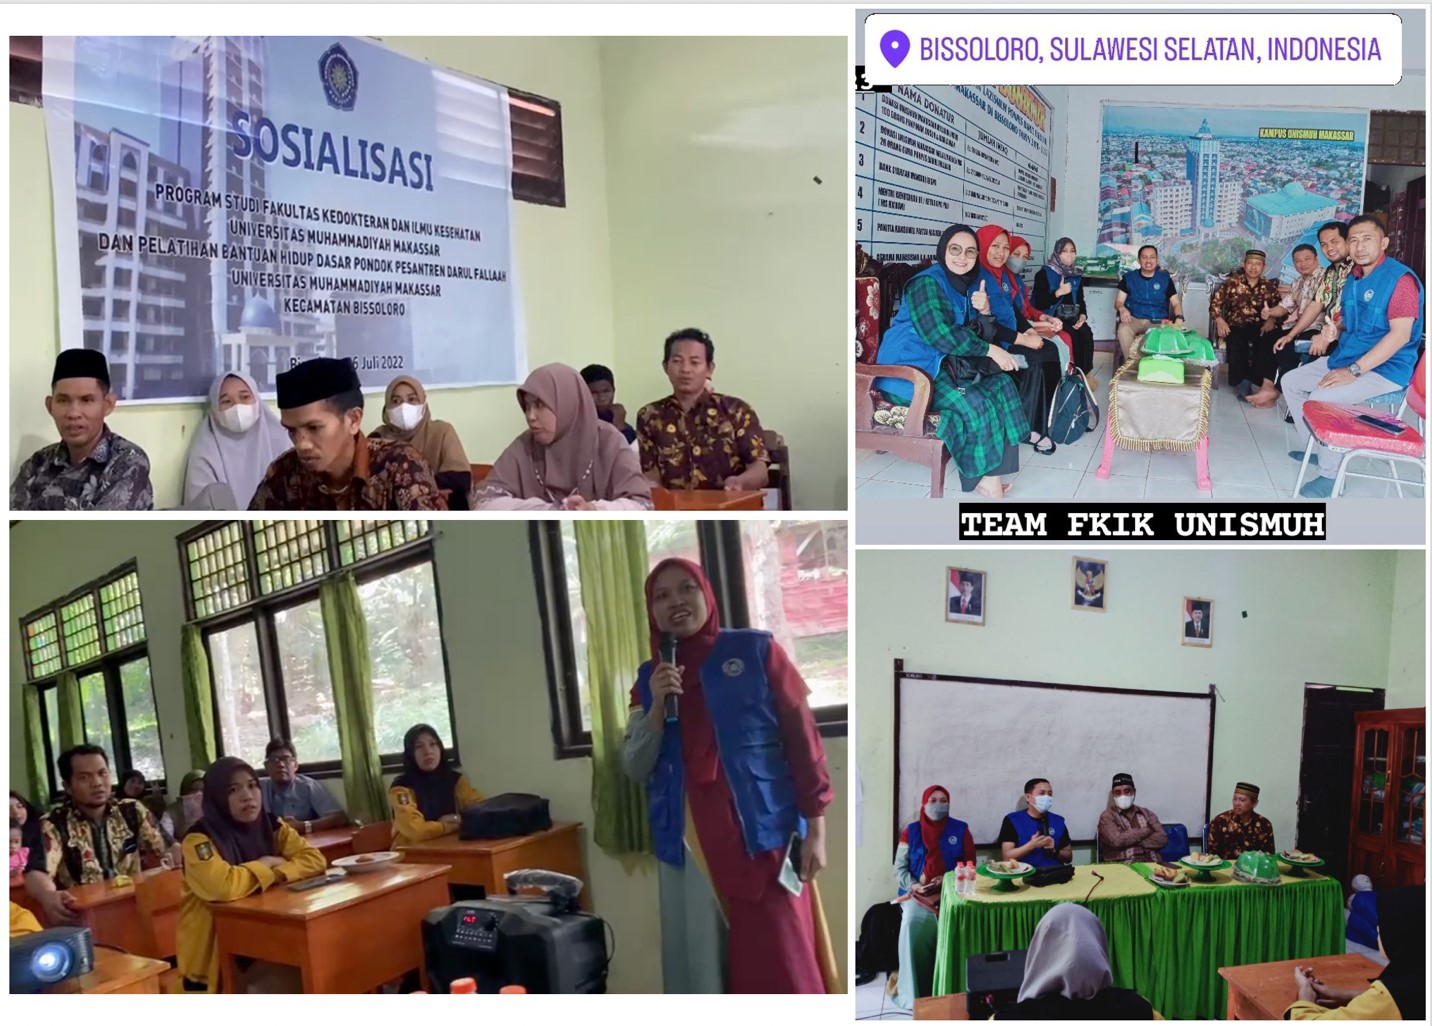 SOCIALIZATION OF STUDY PROGRAMS AS WELL AS IMPLEMENTATION OF COOPERATION, FKIK UNISMUH VISITS PONPES DARUL FALLAAH BISSOLORO GOWA